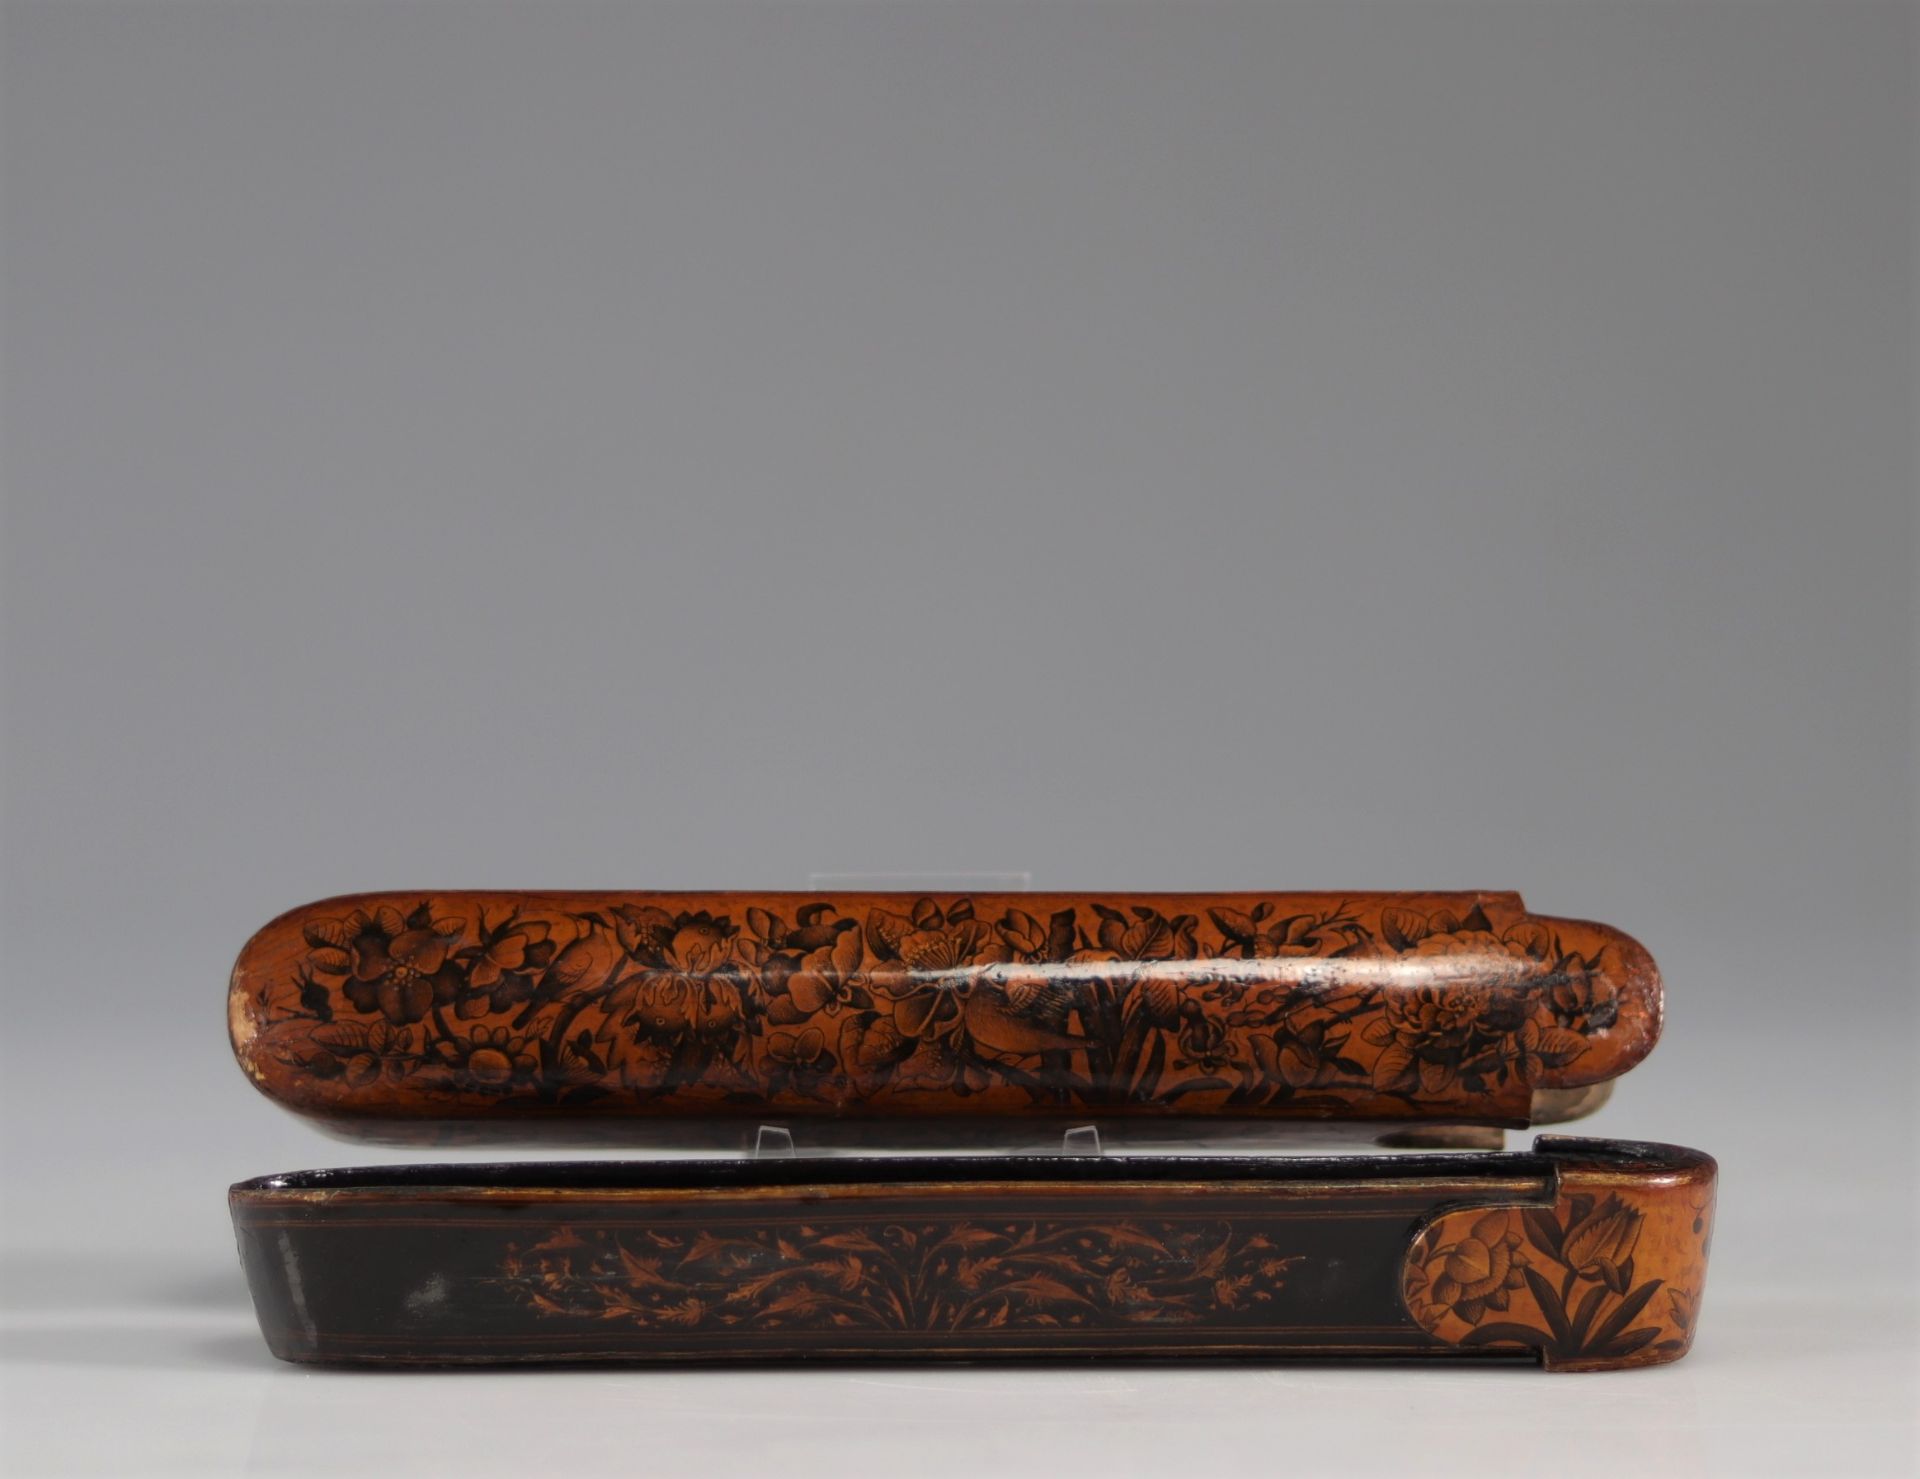 19th century Kadjar travel pencil case in polychrome lacquer with floral decoration - Image 2 of 5